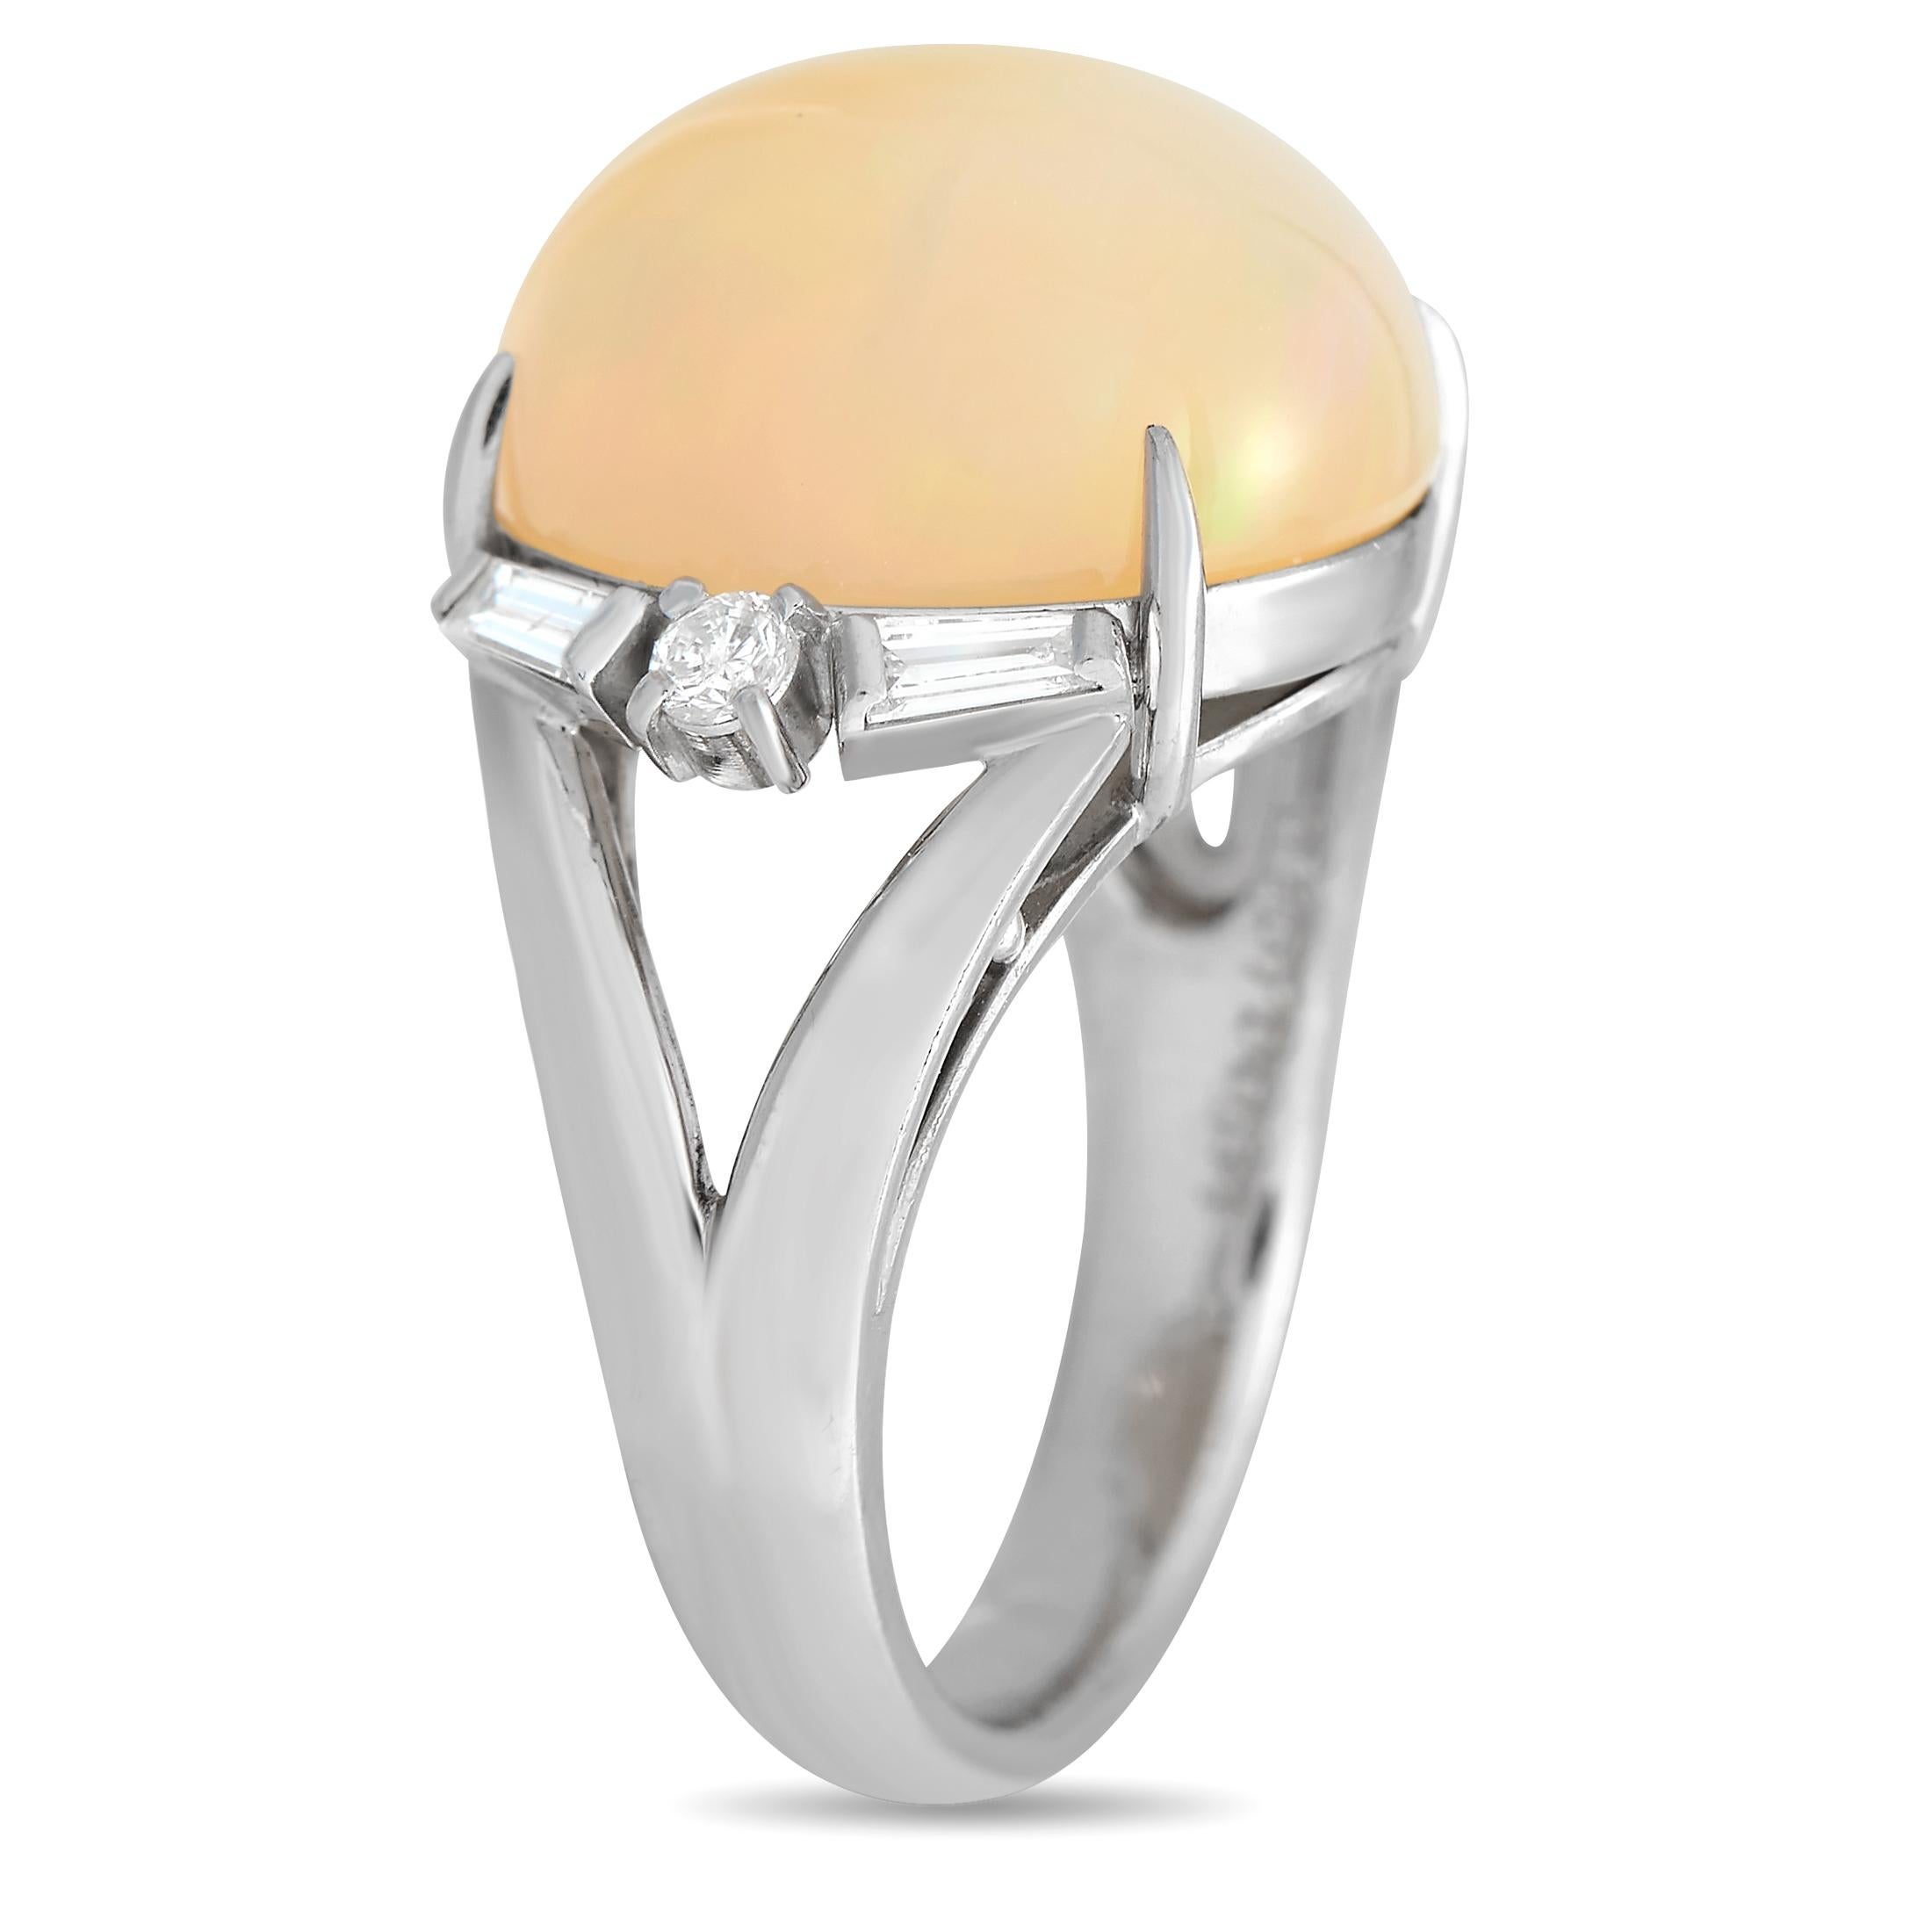 A bold 9.87 carat Opal with a stunning peach hue makes a statement at the center of this rings simple Platinum setting. Accented by Diamonds totaling 0.34 carats, it features a 4mm wide band and a top height measuring 10mm.This jewelry piece is